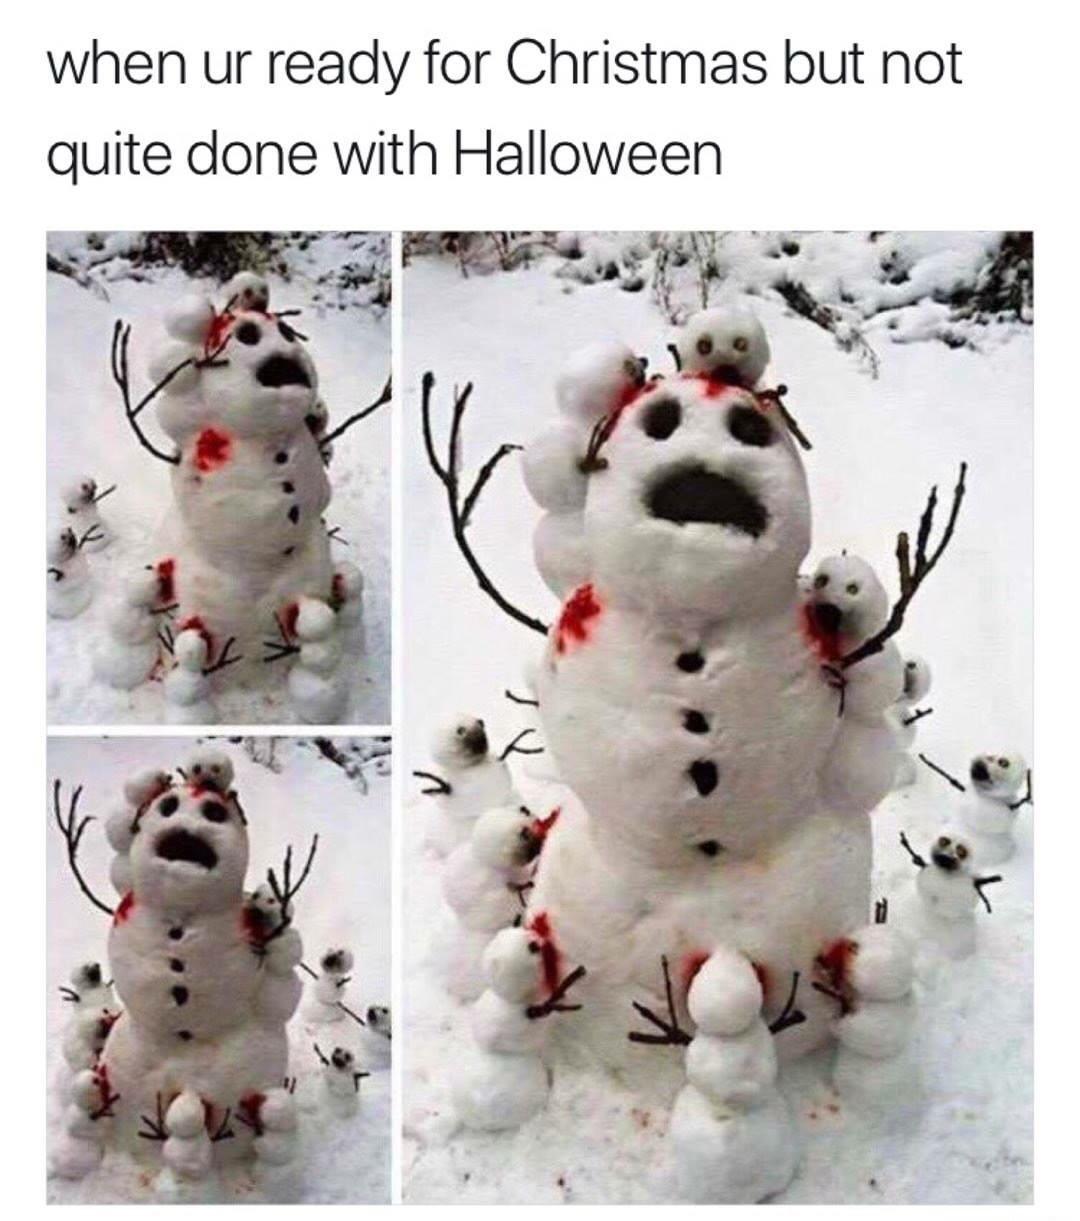 dank meme - snowman meme - when ur ready for Christmas but not quite done with Halloween